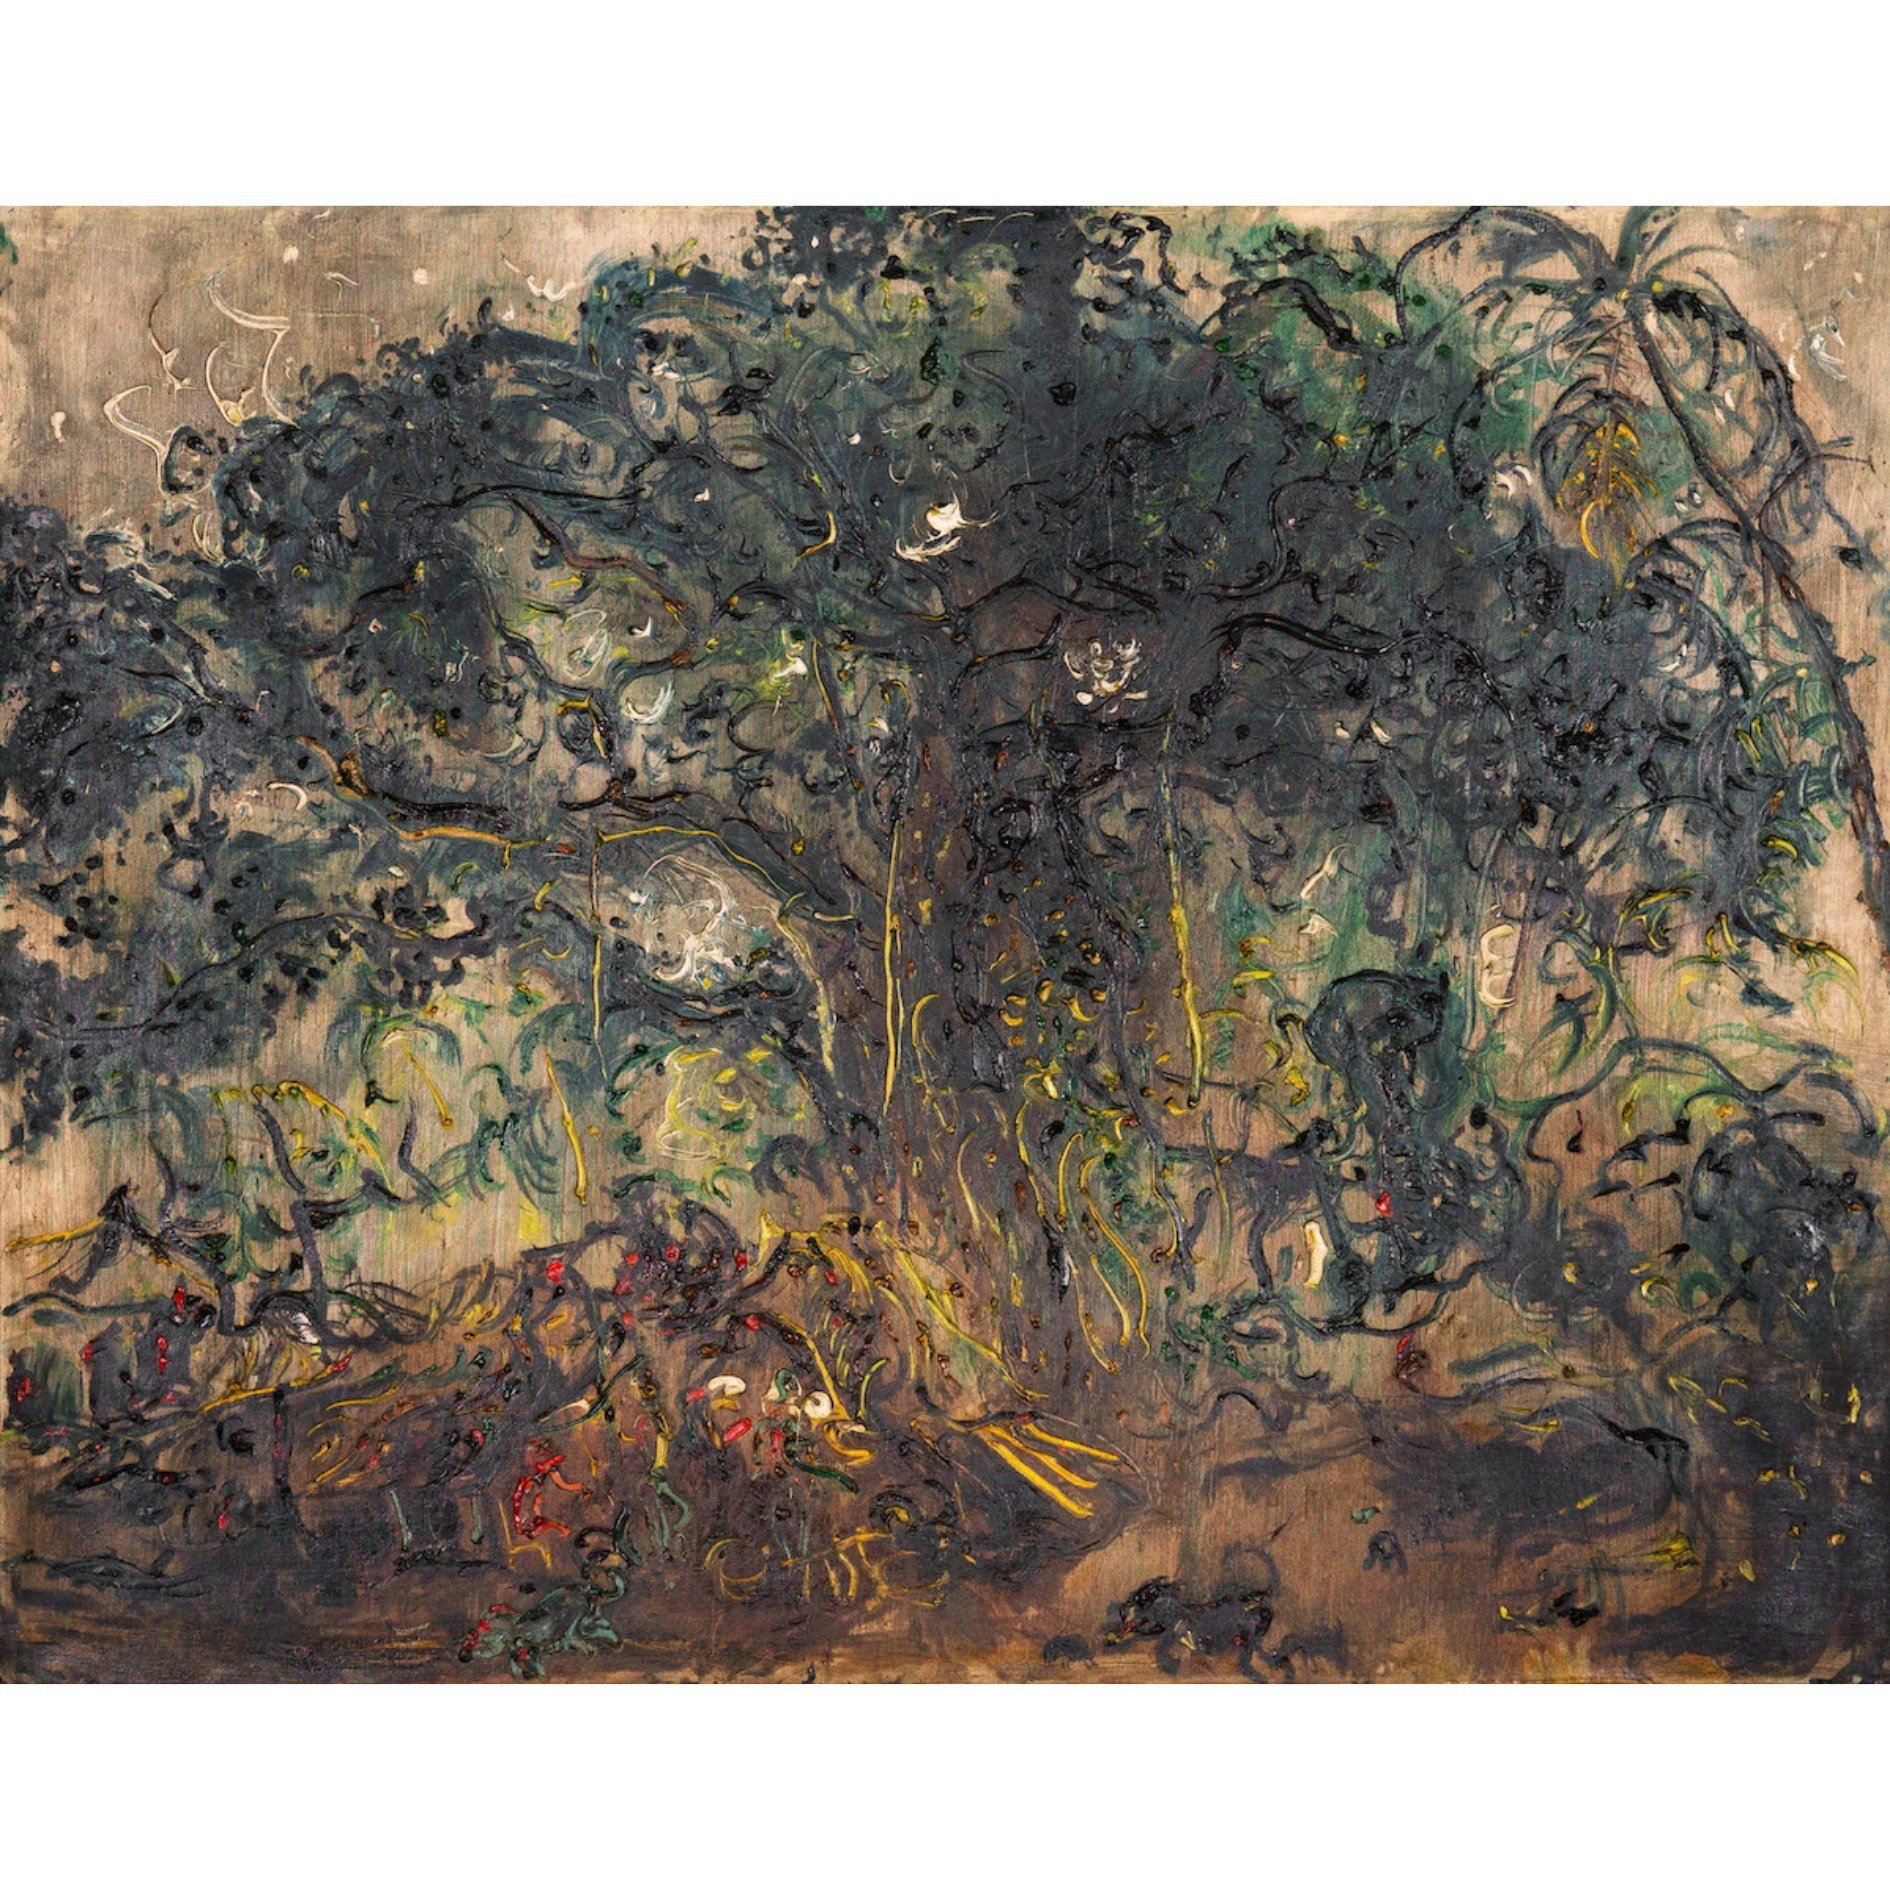 [NEWS] Art Agenda (@artagendasea) opened the sixth exhibition in The Modernist Series in its Jakarta gallery, featuring the modern Indonesian artist Affandi in an exhibition titled &lsquo;Hayat&rsquo;, or &lsquo;Life&rsquo;. 

The artist painted with